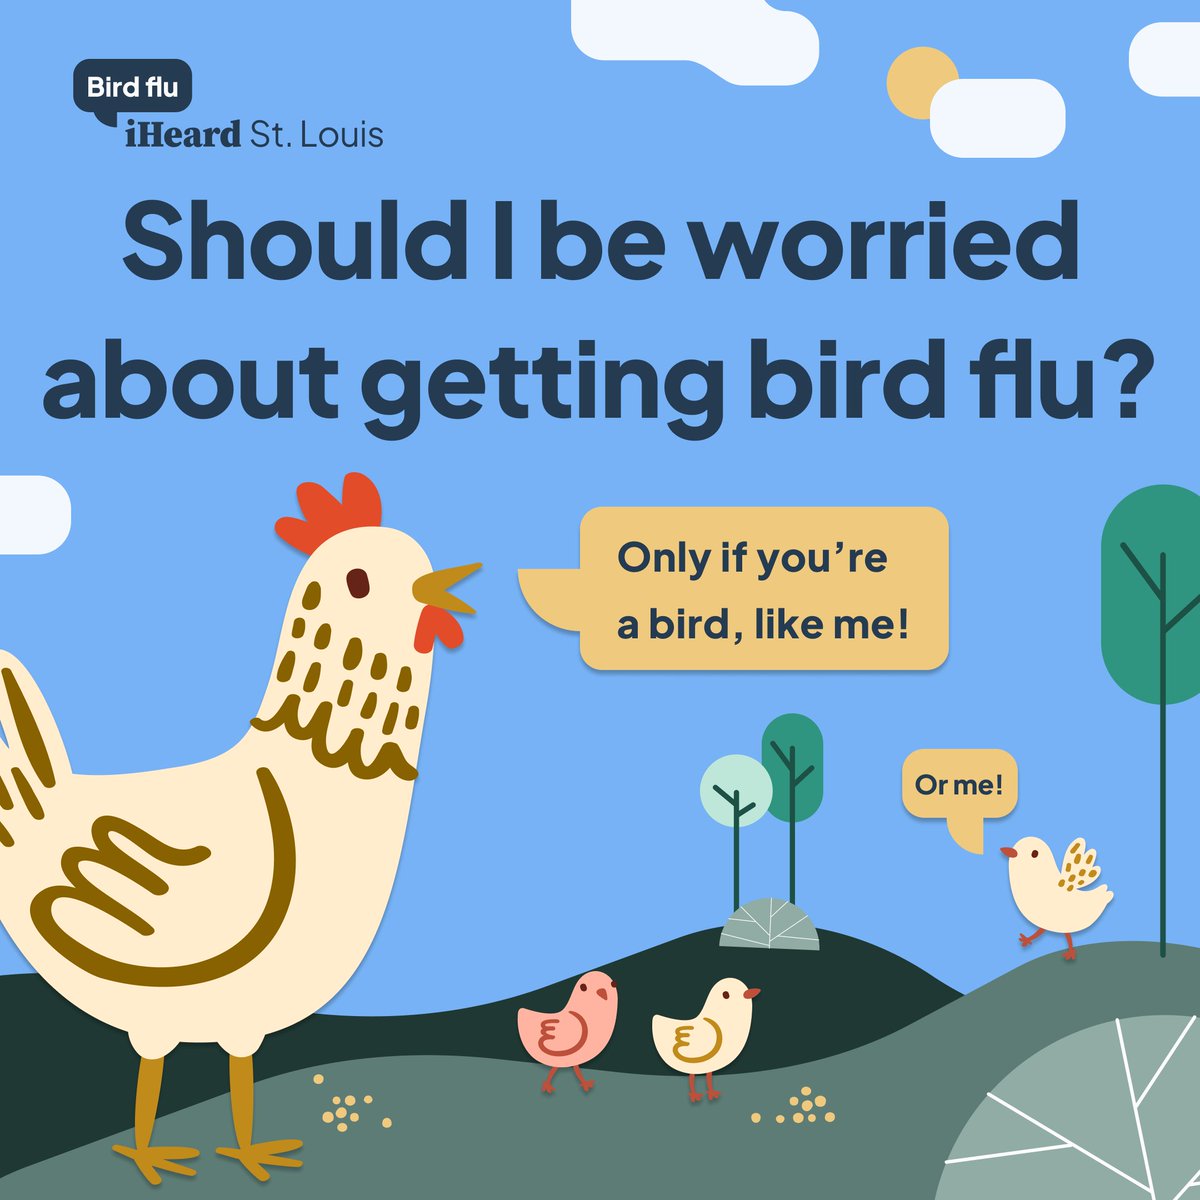 The risk of catching bird flu for the general public is low. Bird flu has only been recorded to have spread to a human twice in the U.S. But keep your backyard chickens safe! #iHeardSTL #BirdFlu